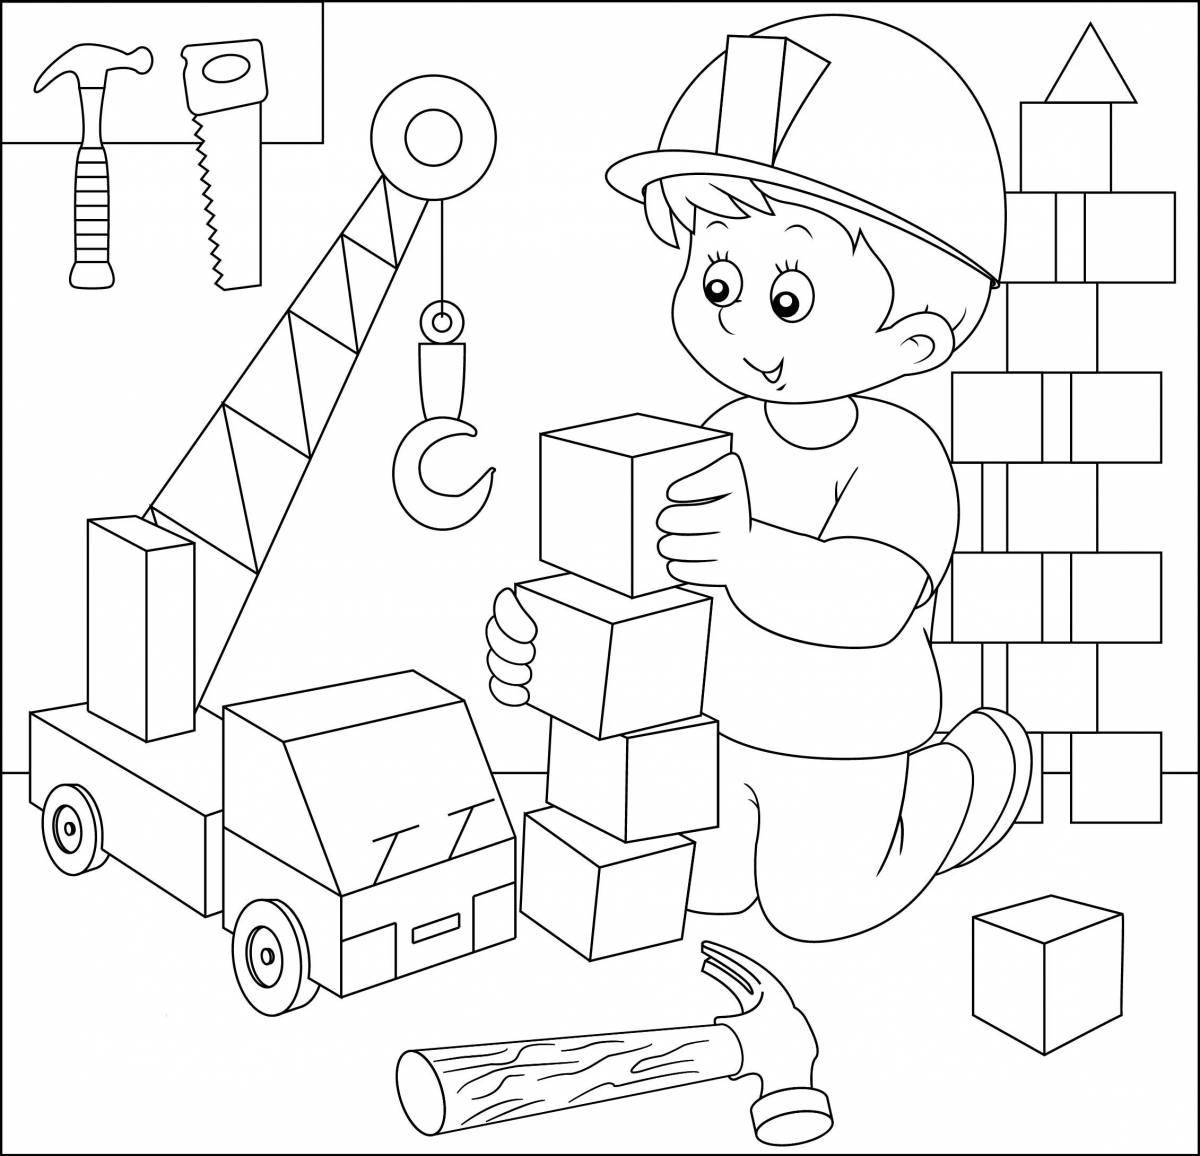 Occupational safety through the eyes of children #21